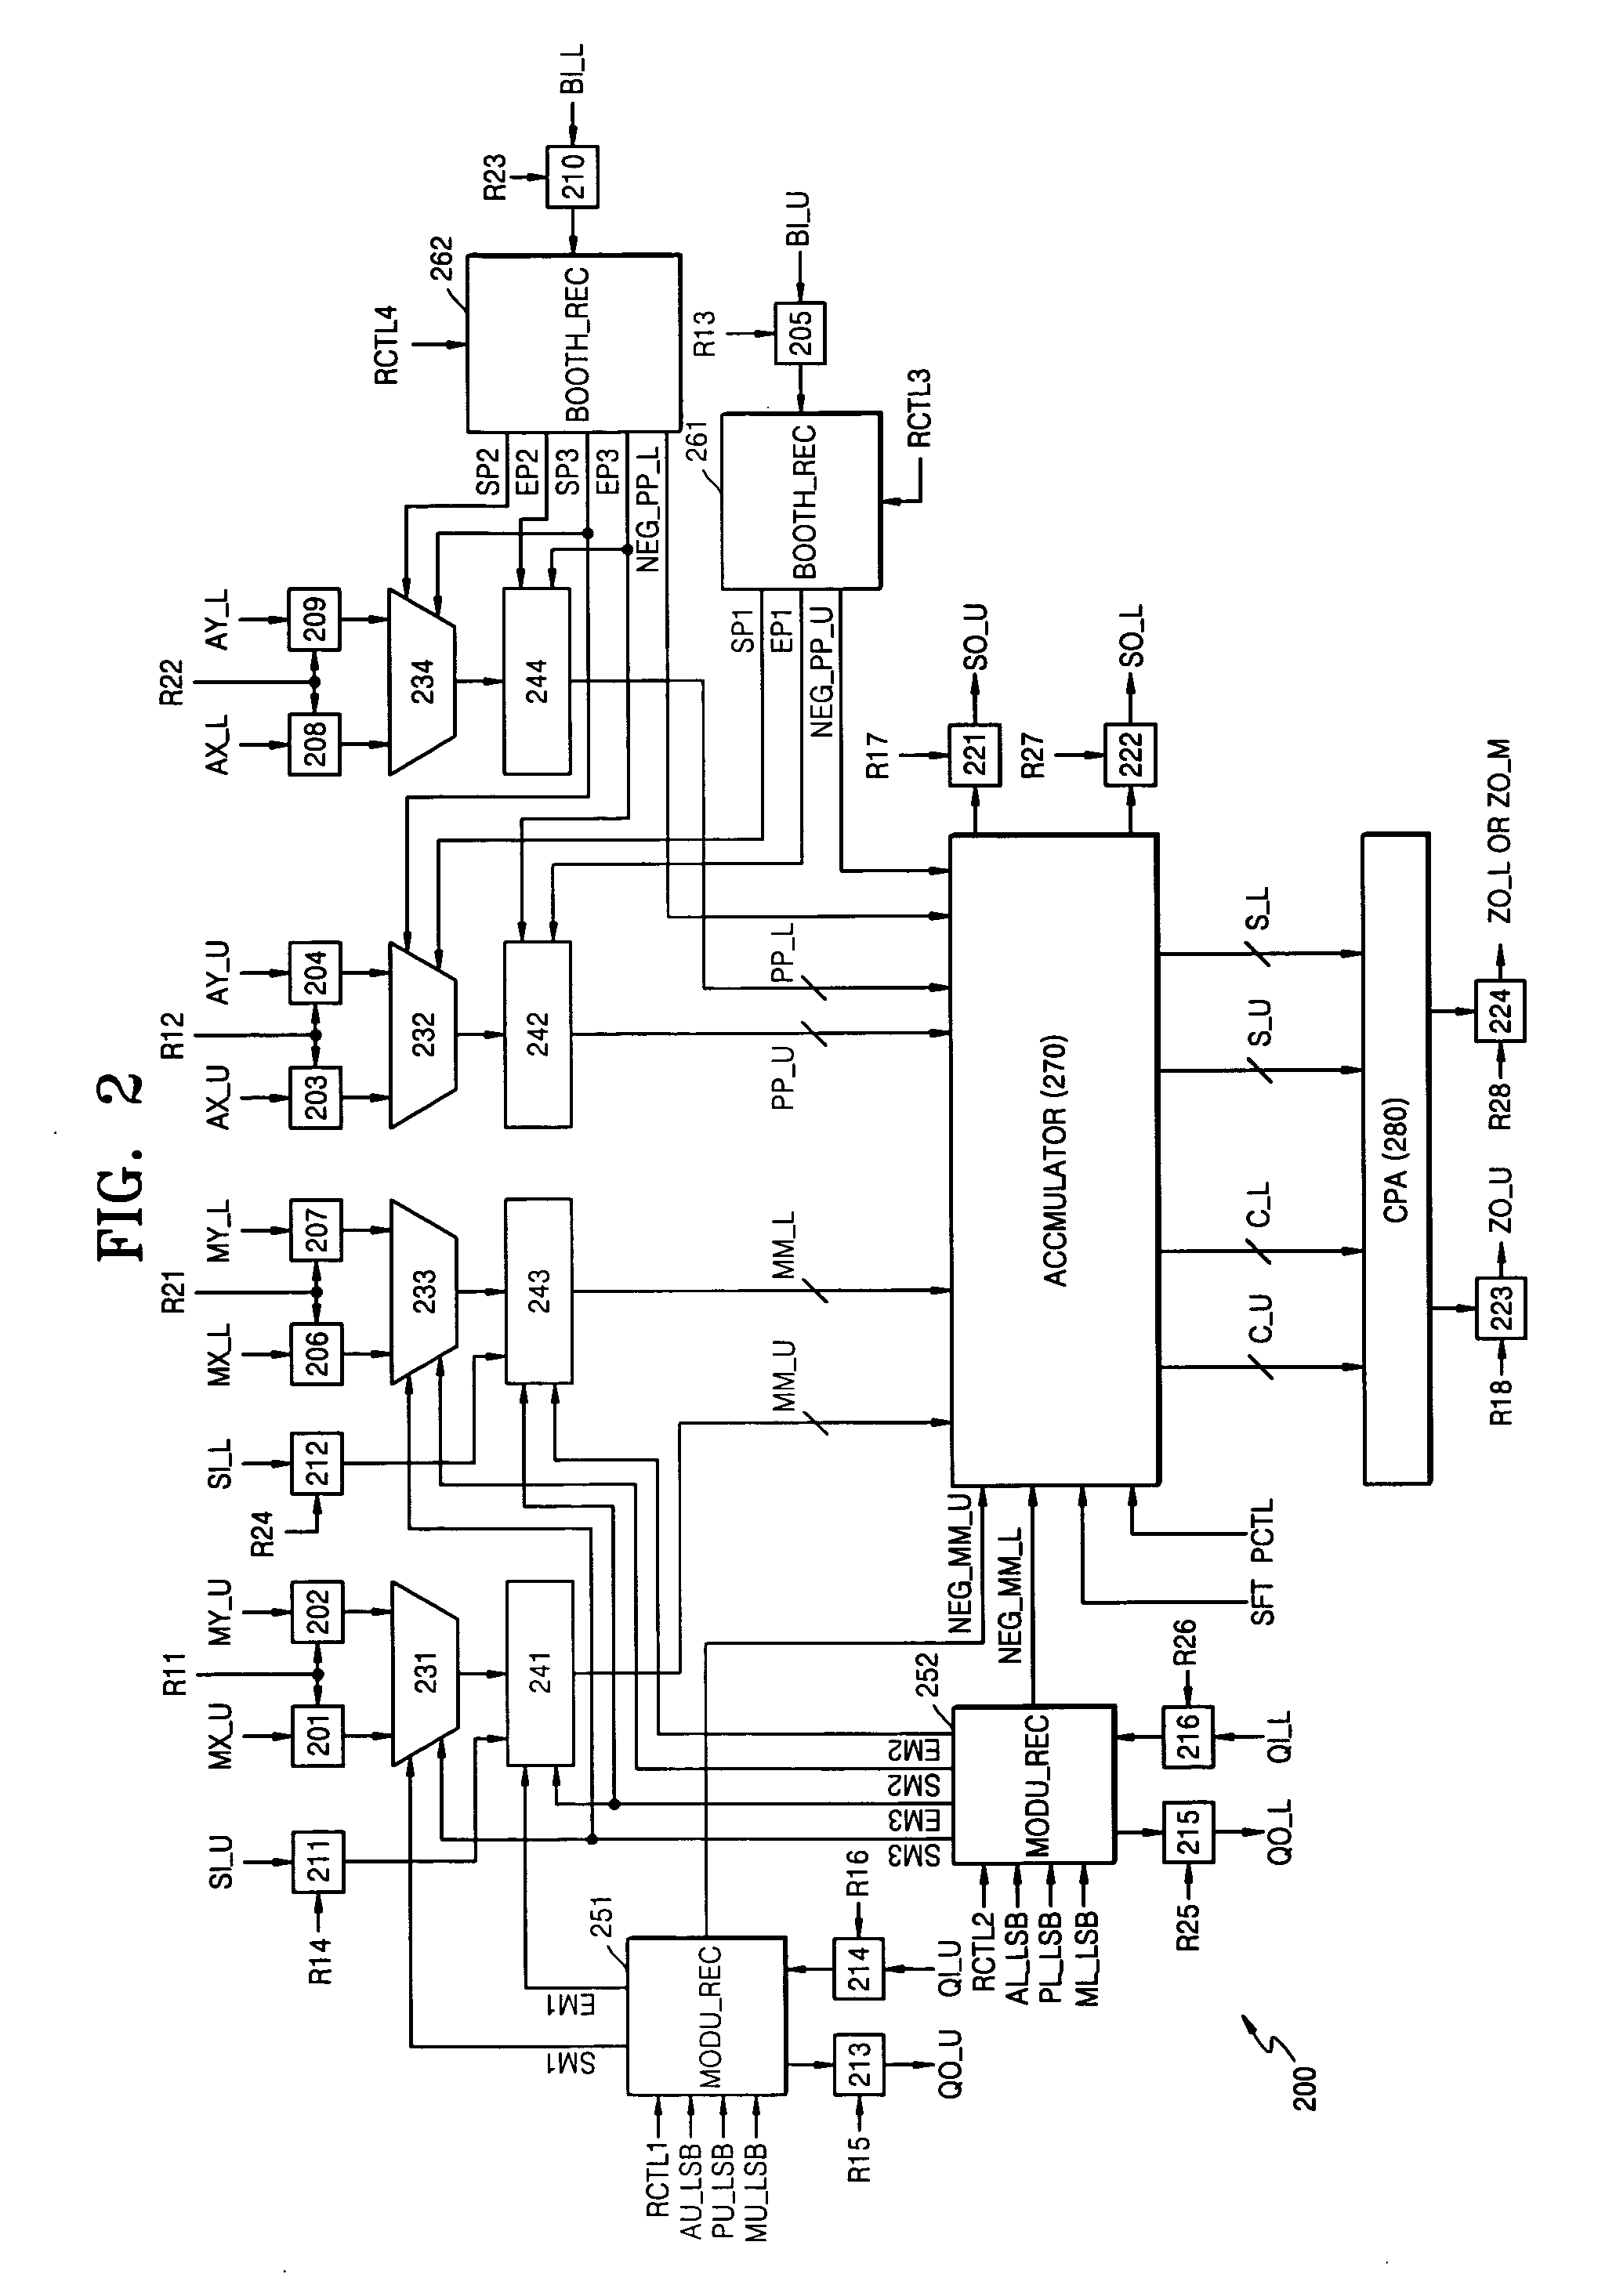 Modular multipliers having segmentable structure and cryptography systems utilizing same